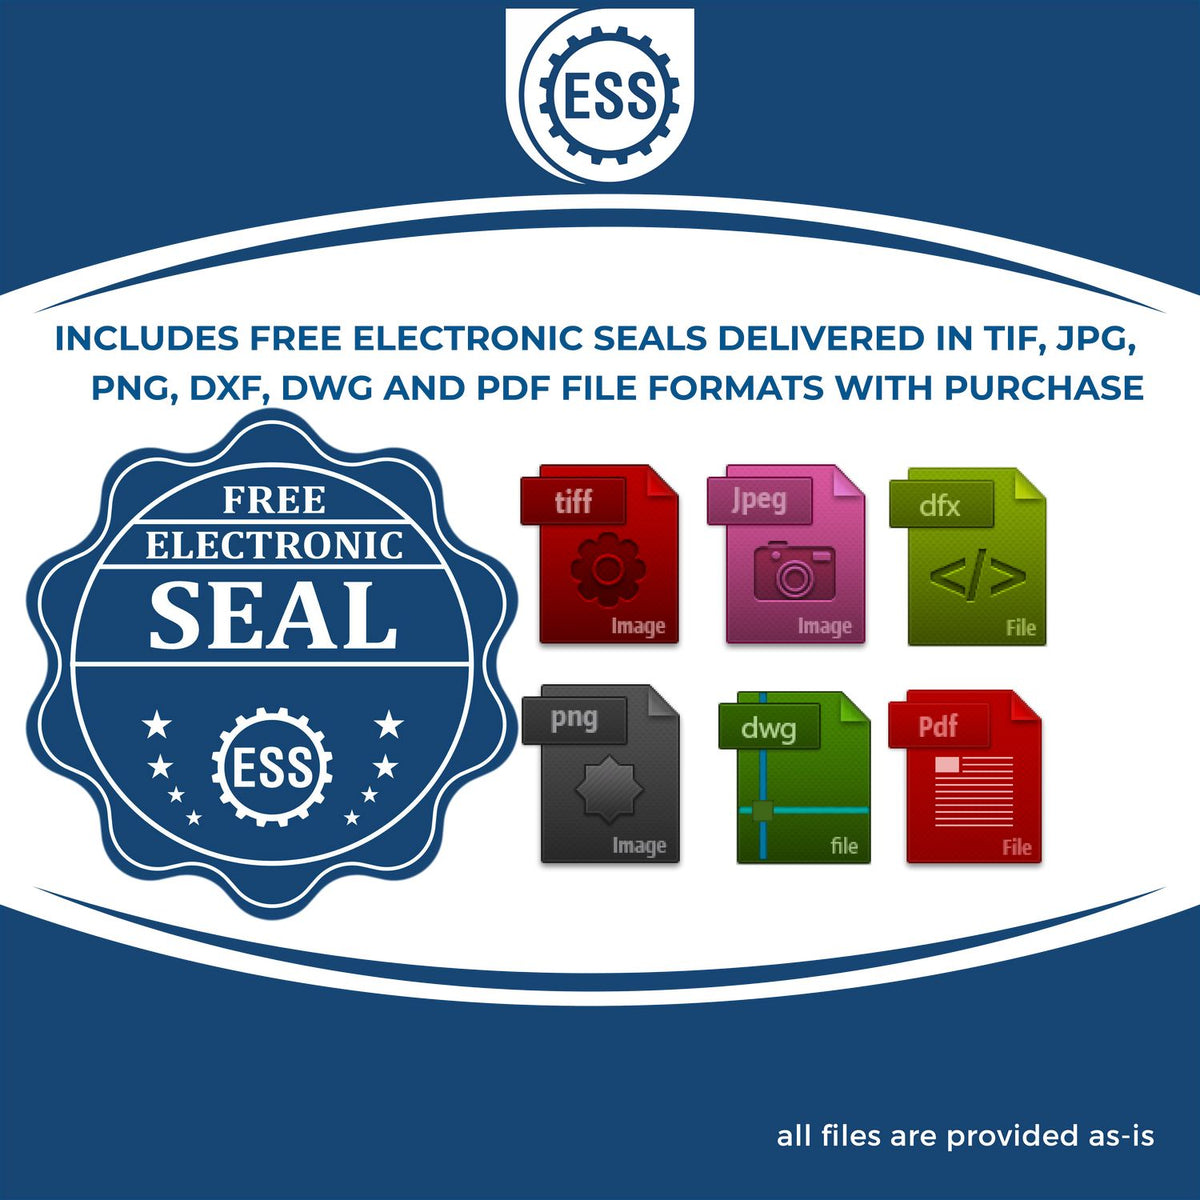 An infographic for the free electronic seal for the Slim Pre-Inked Arizona Professional Geologist Seal Stamp illustrating the different file type icons such as DXF, DWG, TIF, JPG and PNG.